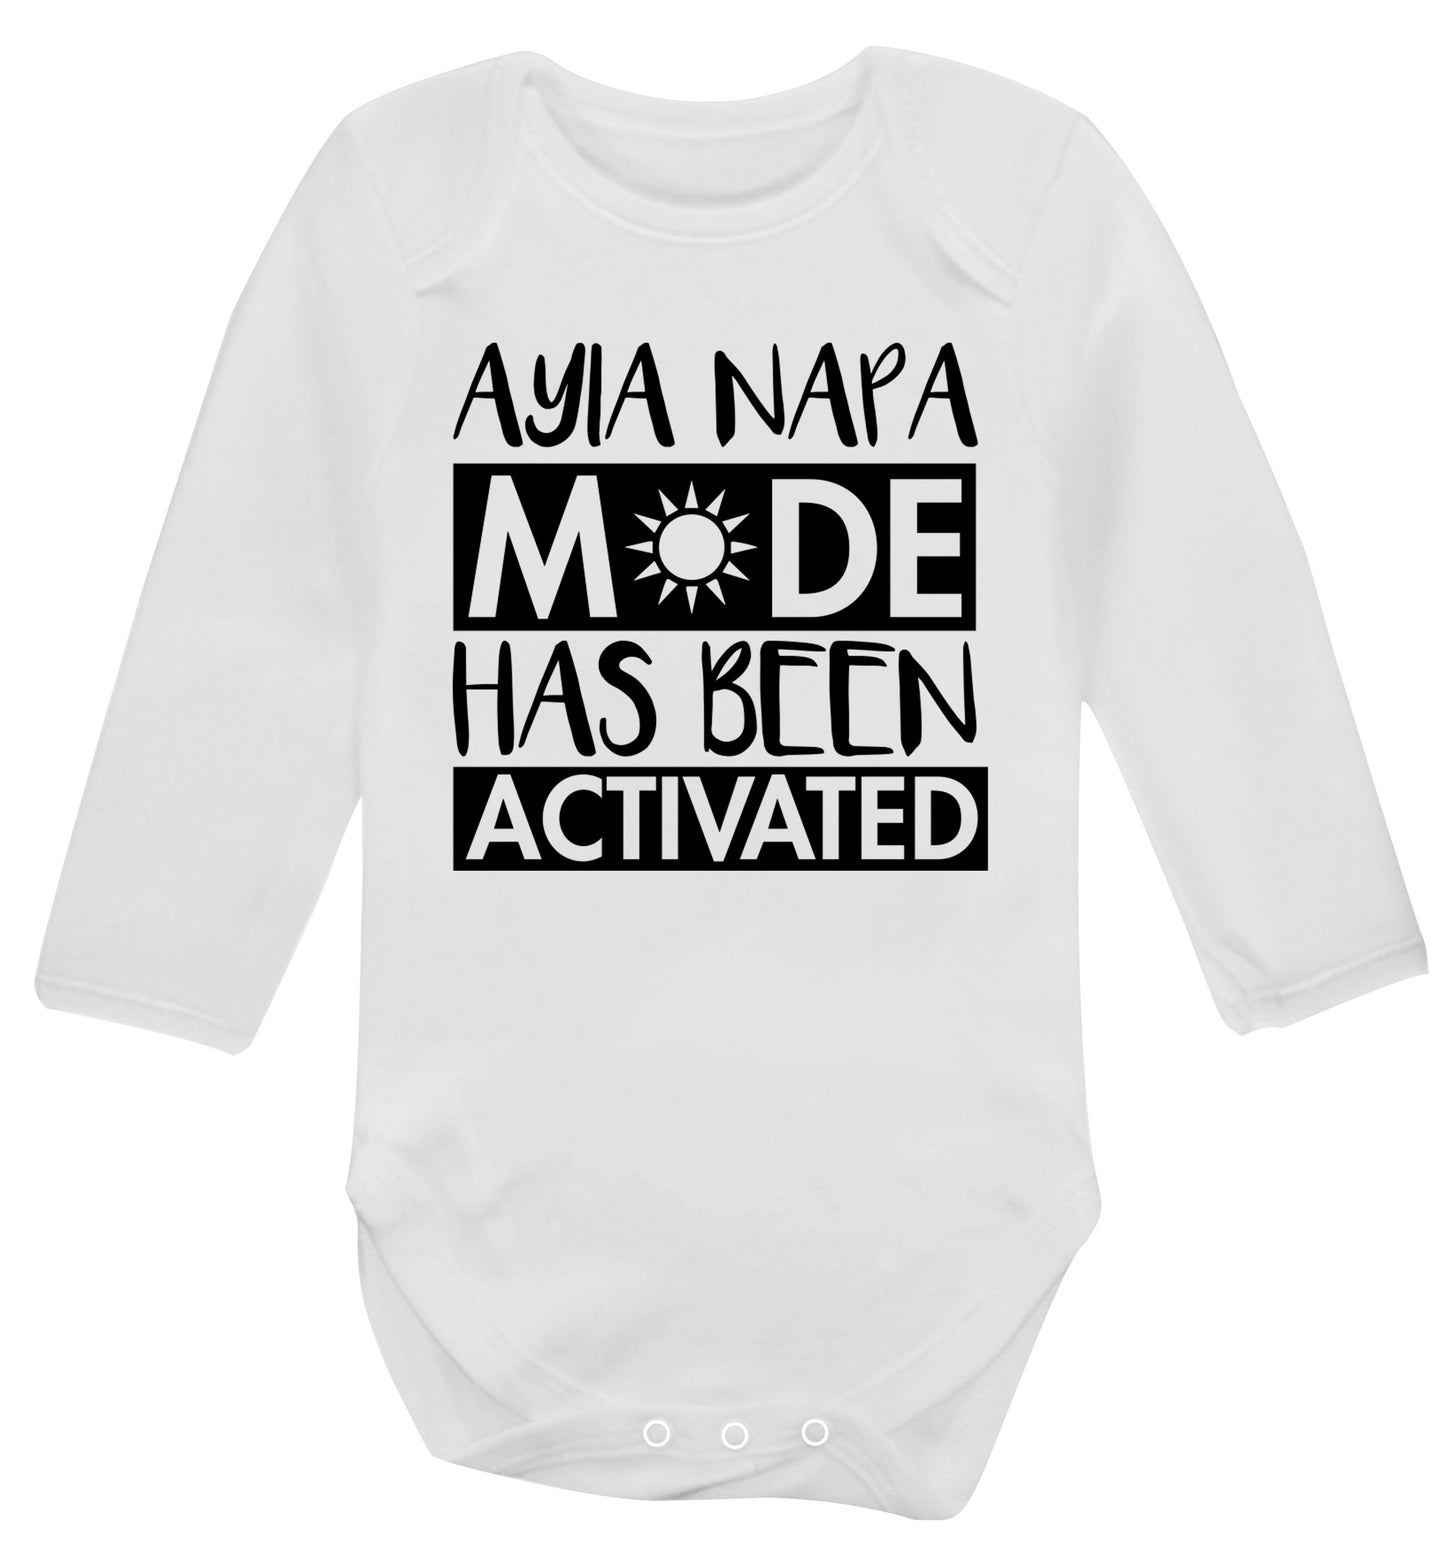 Aiya Napa mode has been activated Baby Vest long sleeved white 6-12 months